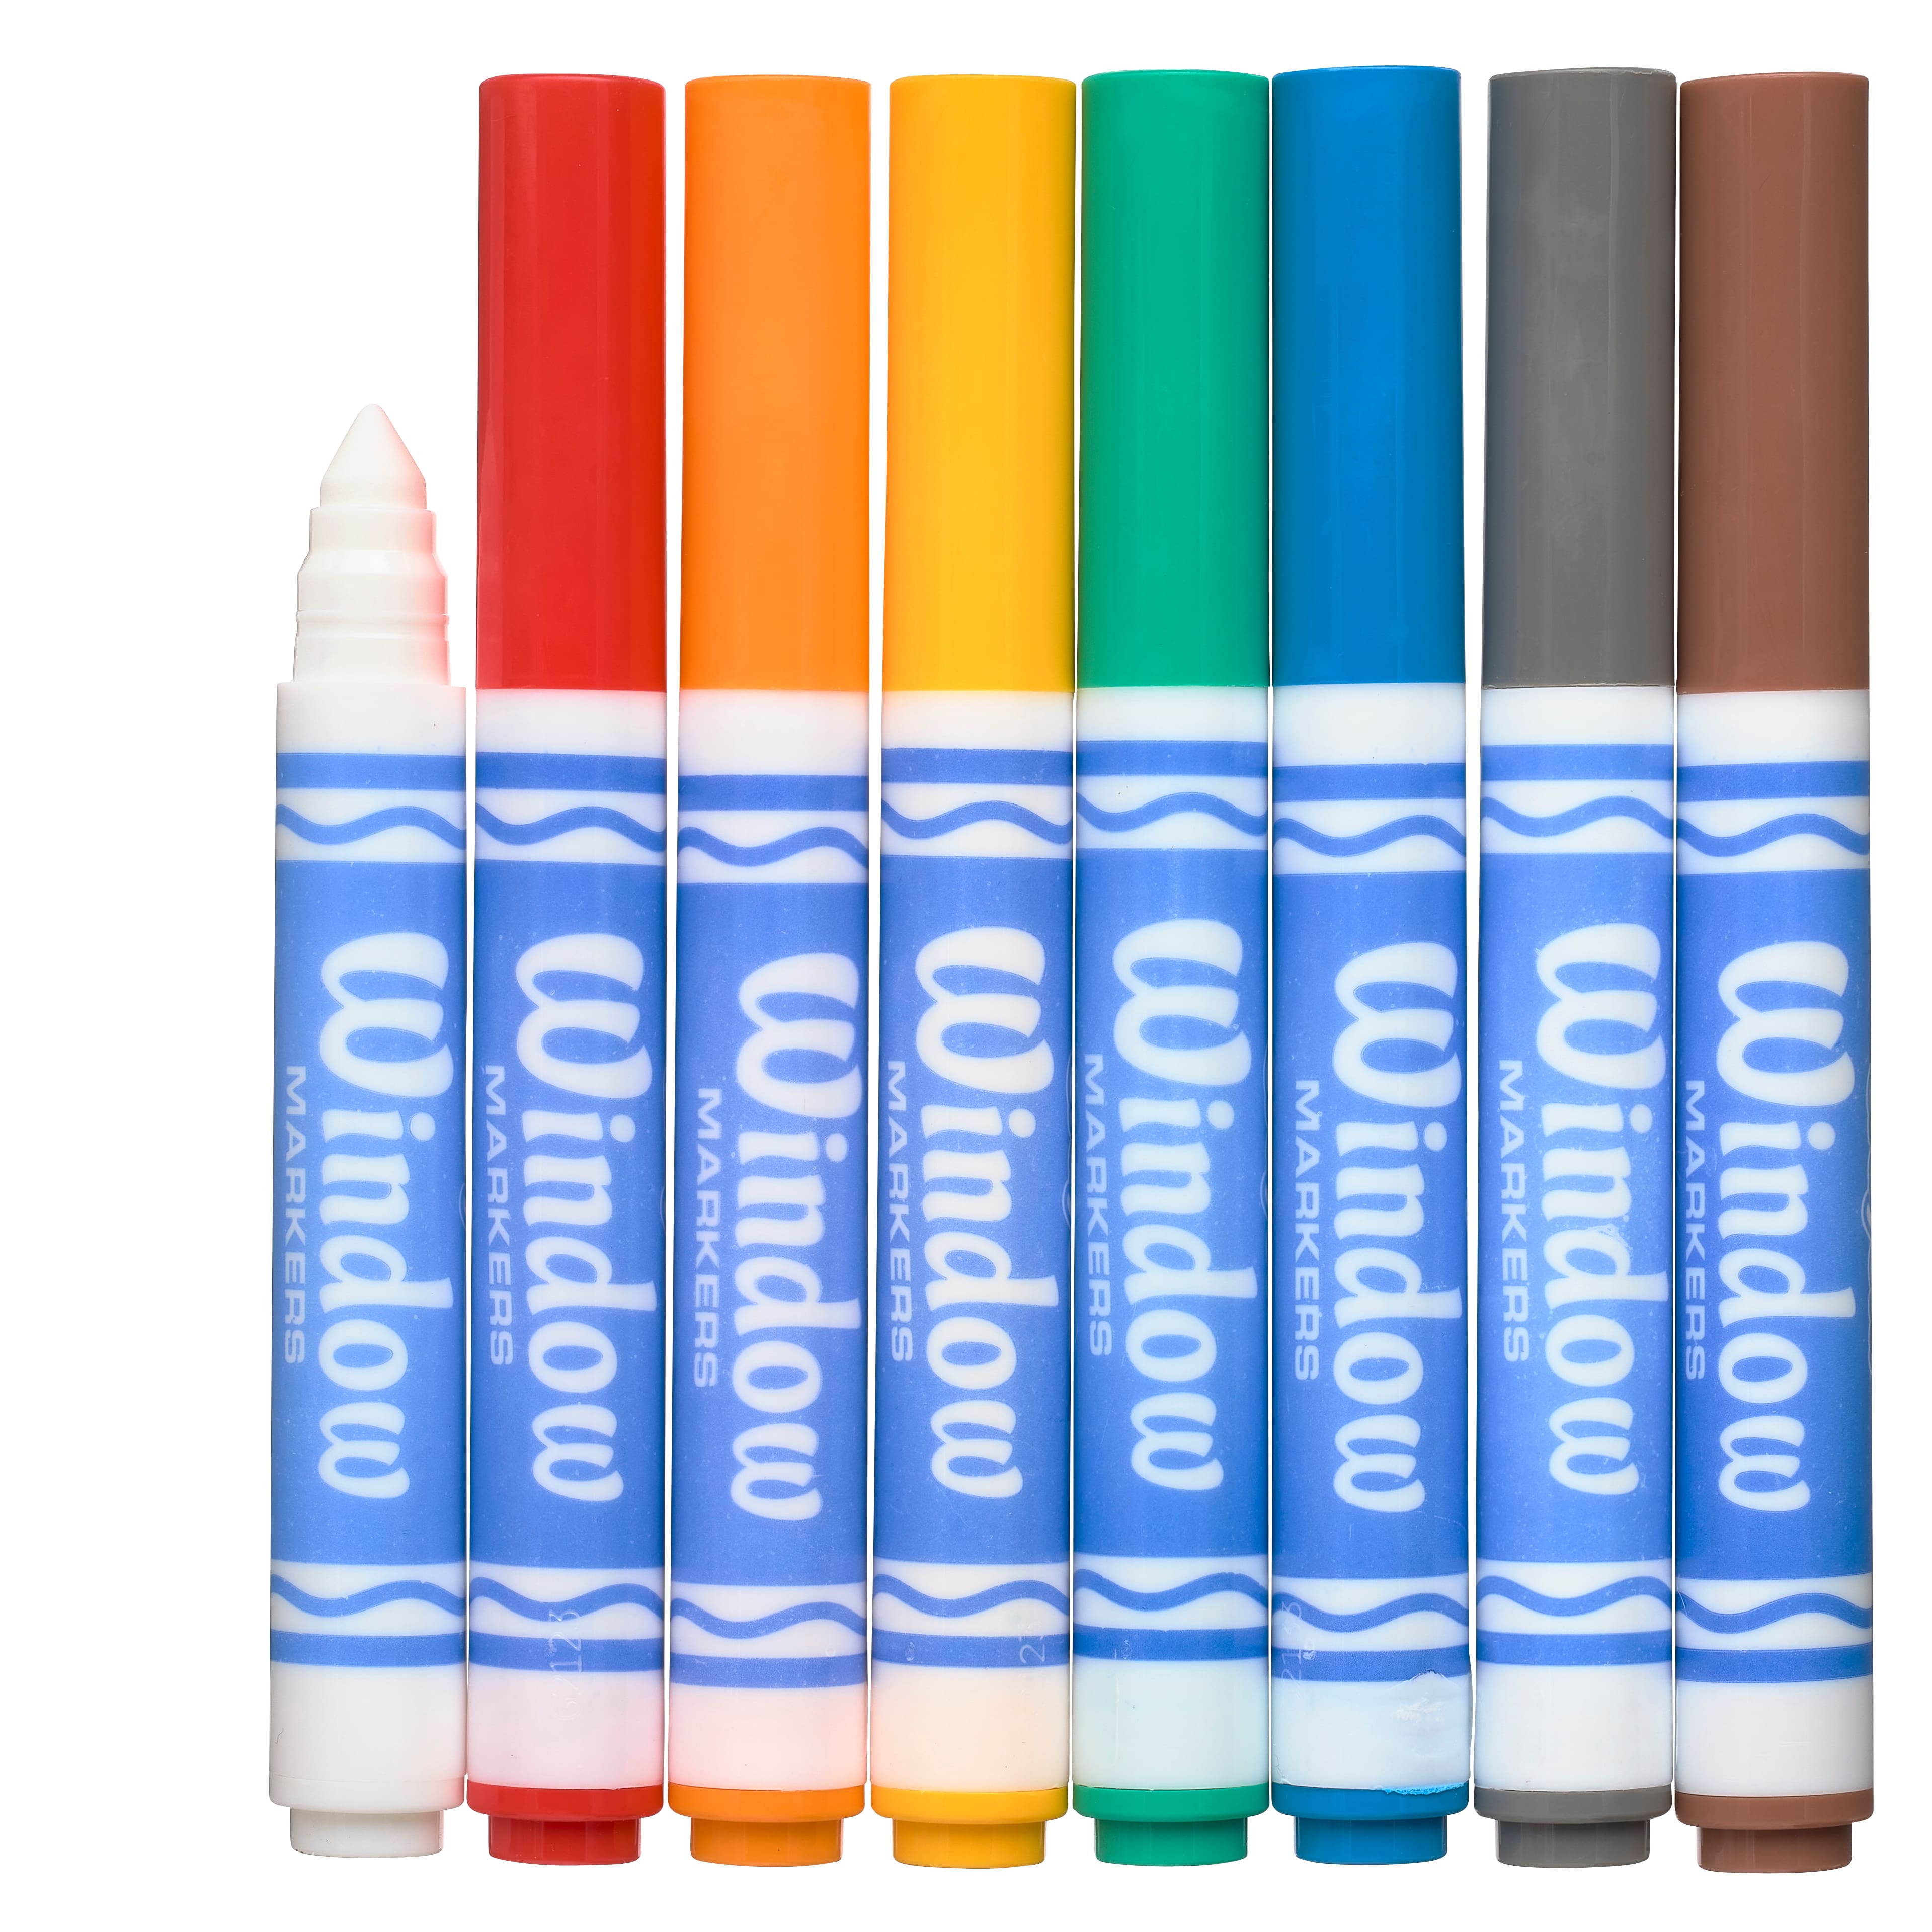 Are Crayola Markers Toxic To Babies? (With Ingredient Breakdown)